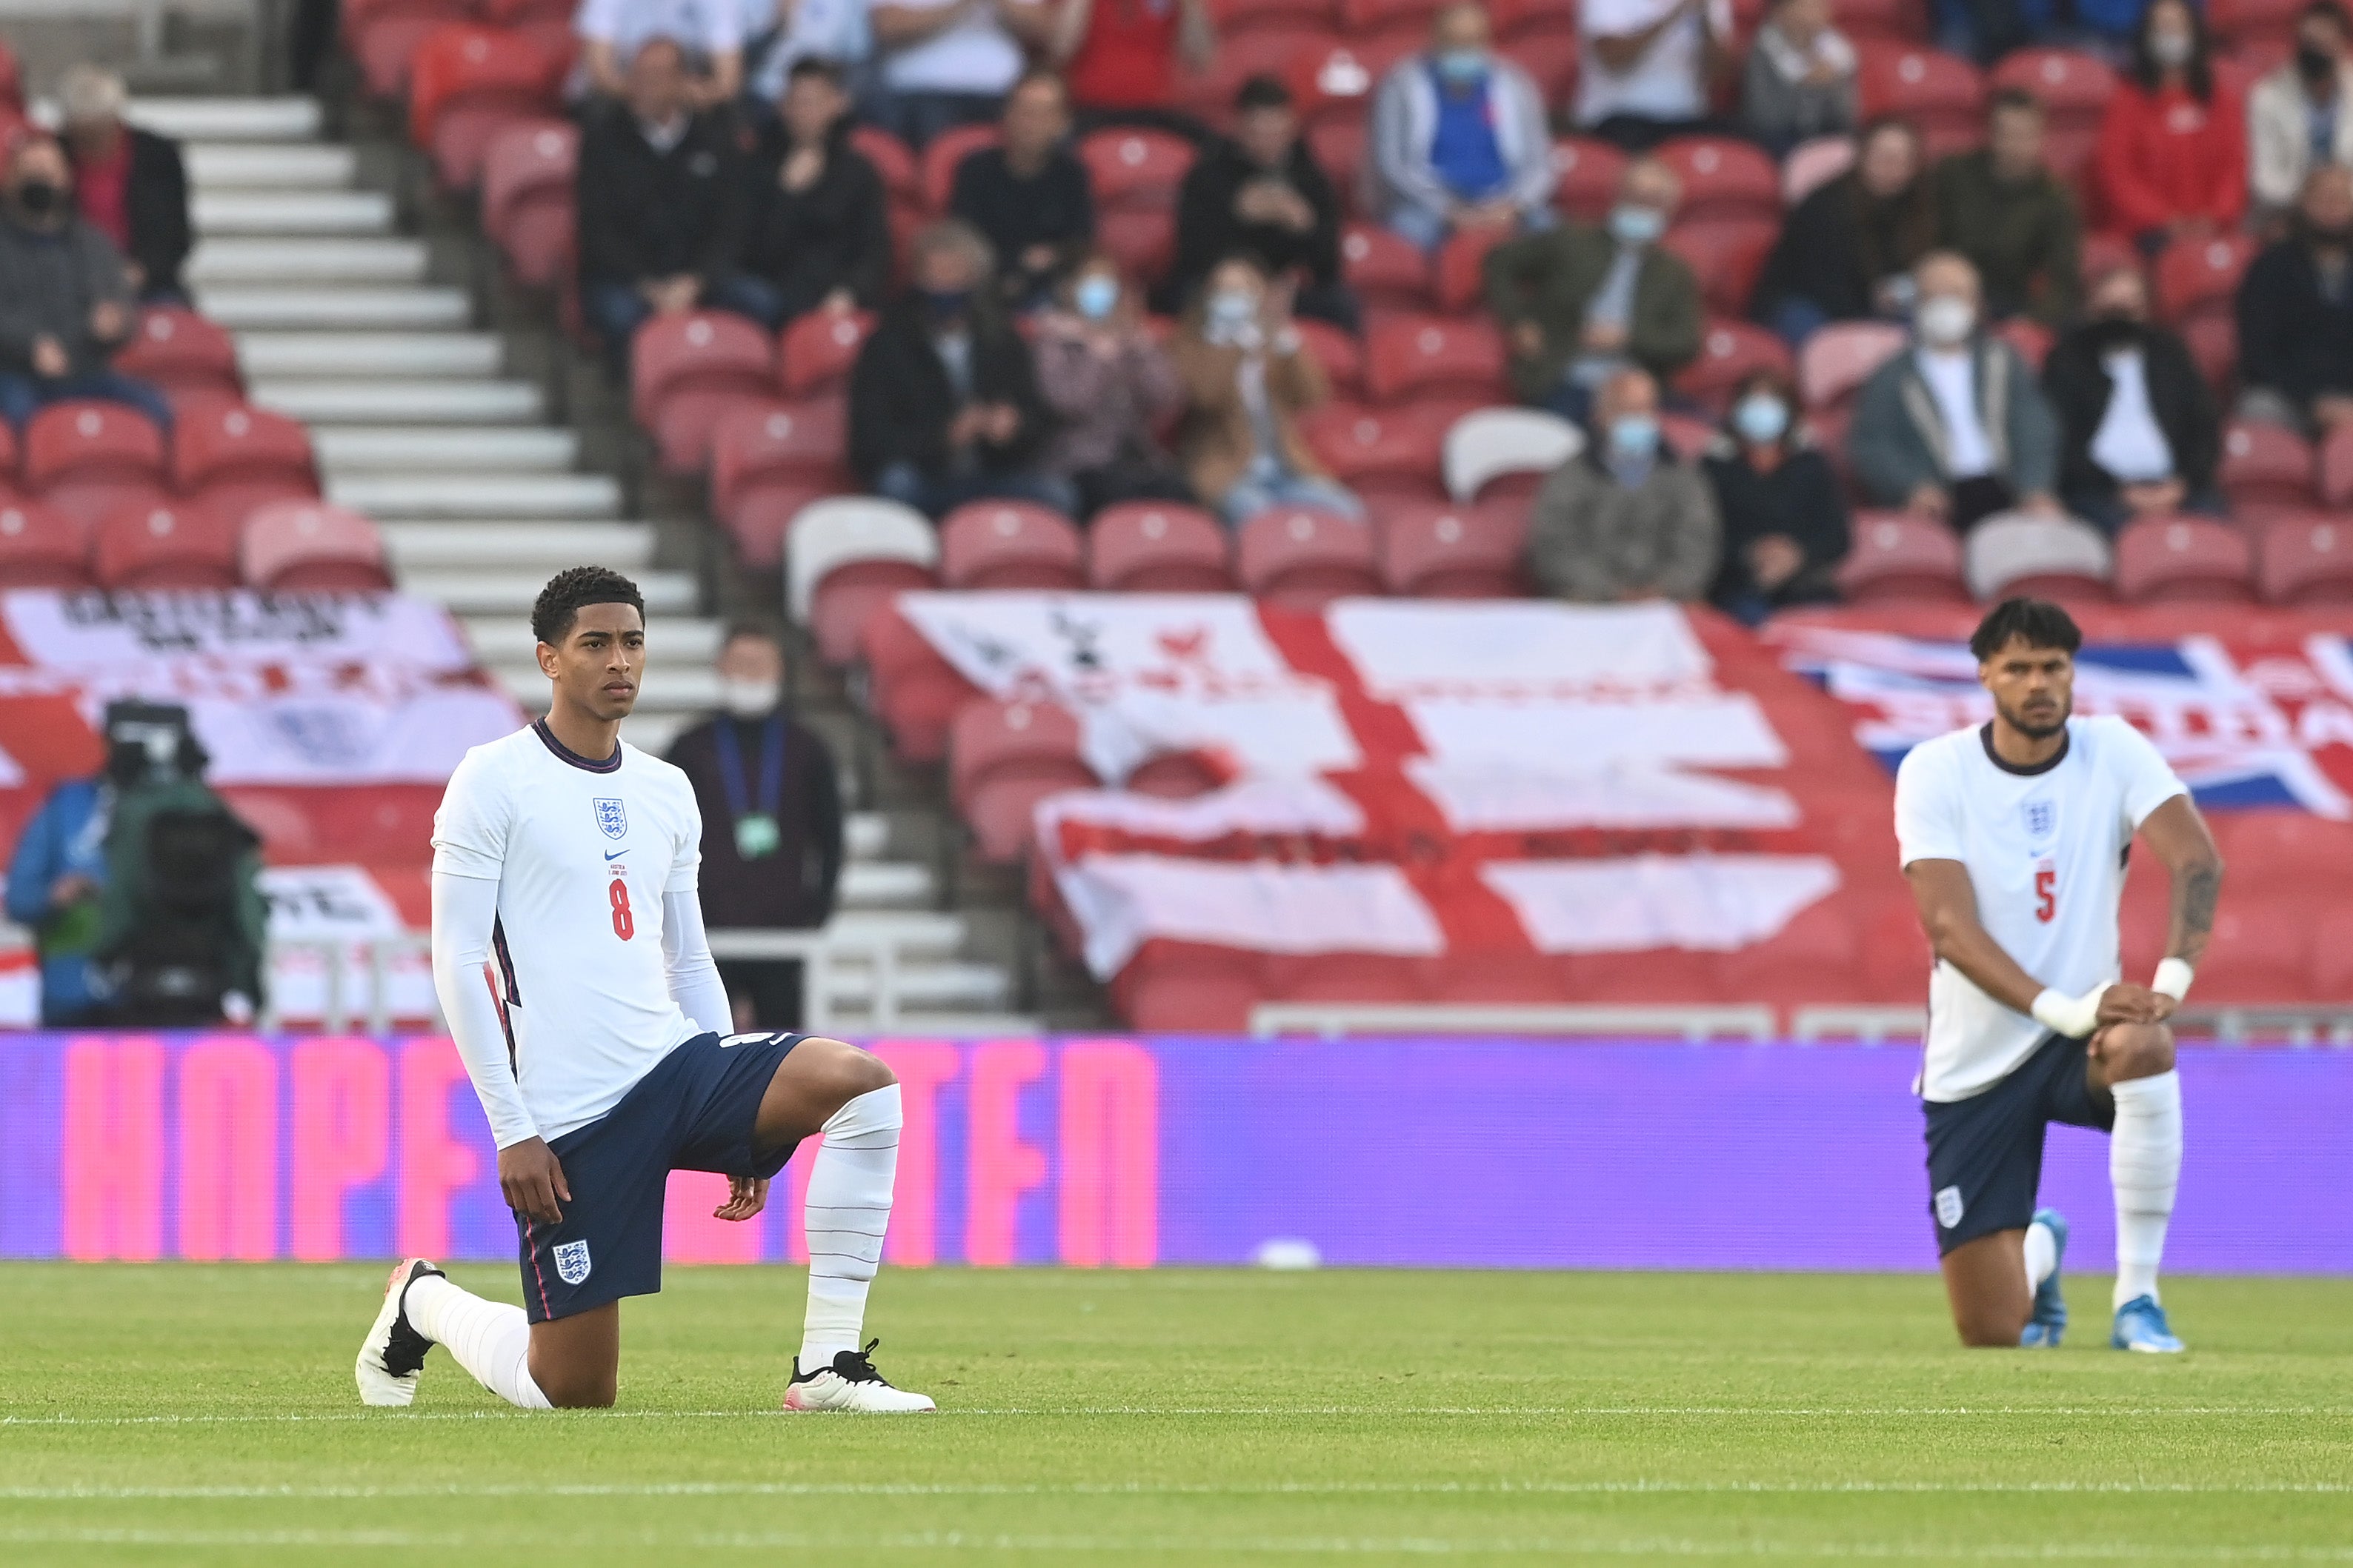 England’s Jude Bellingham and Tyrone Mings taking the knee